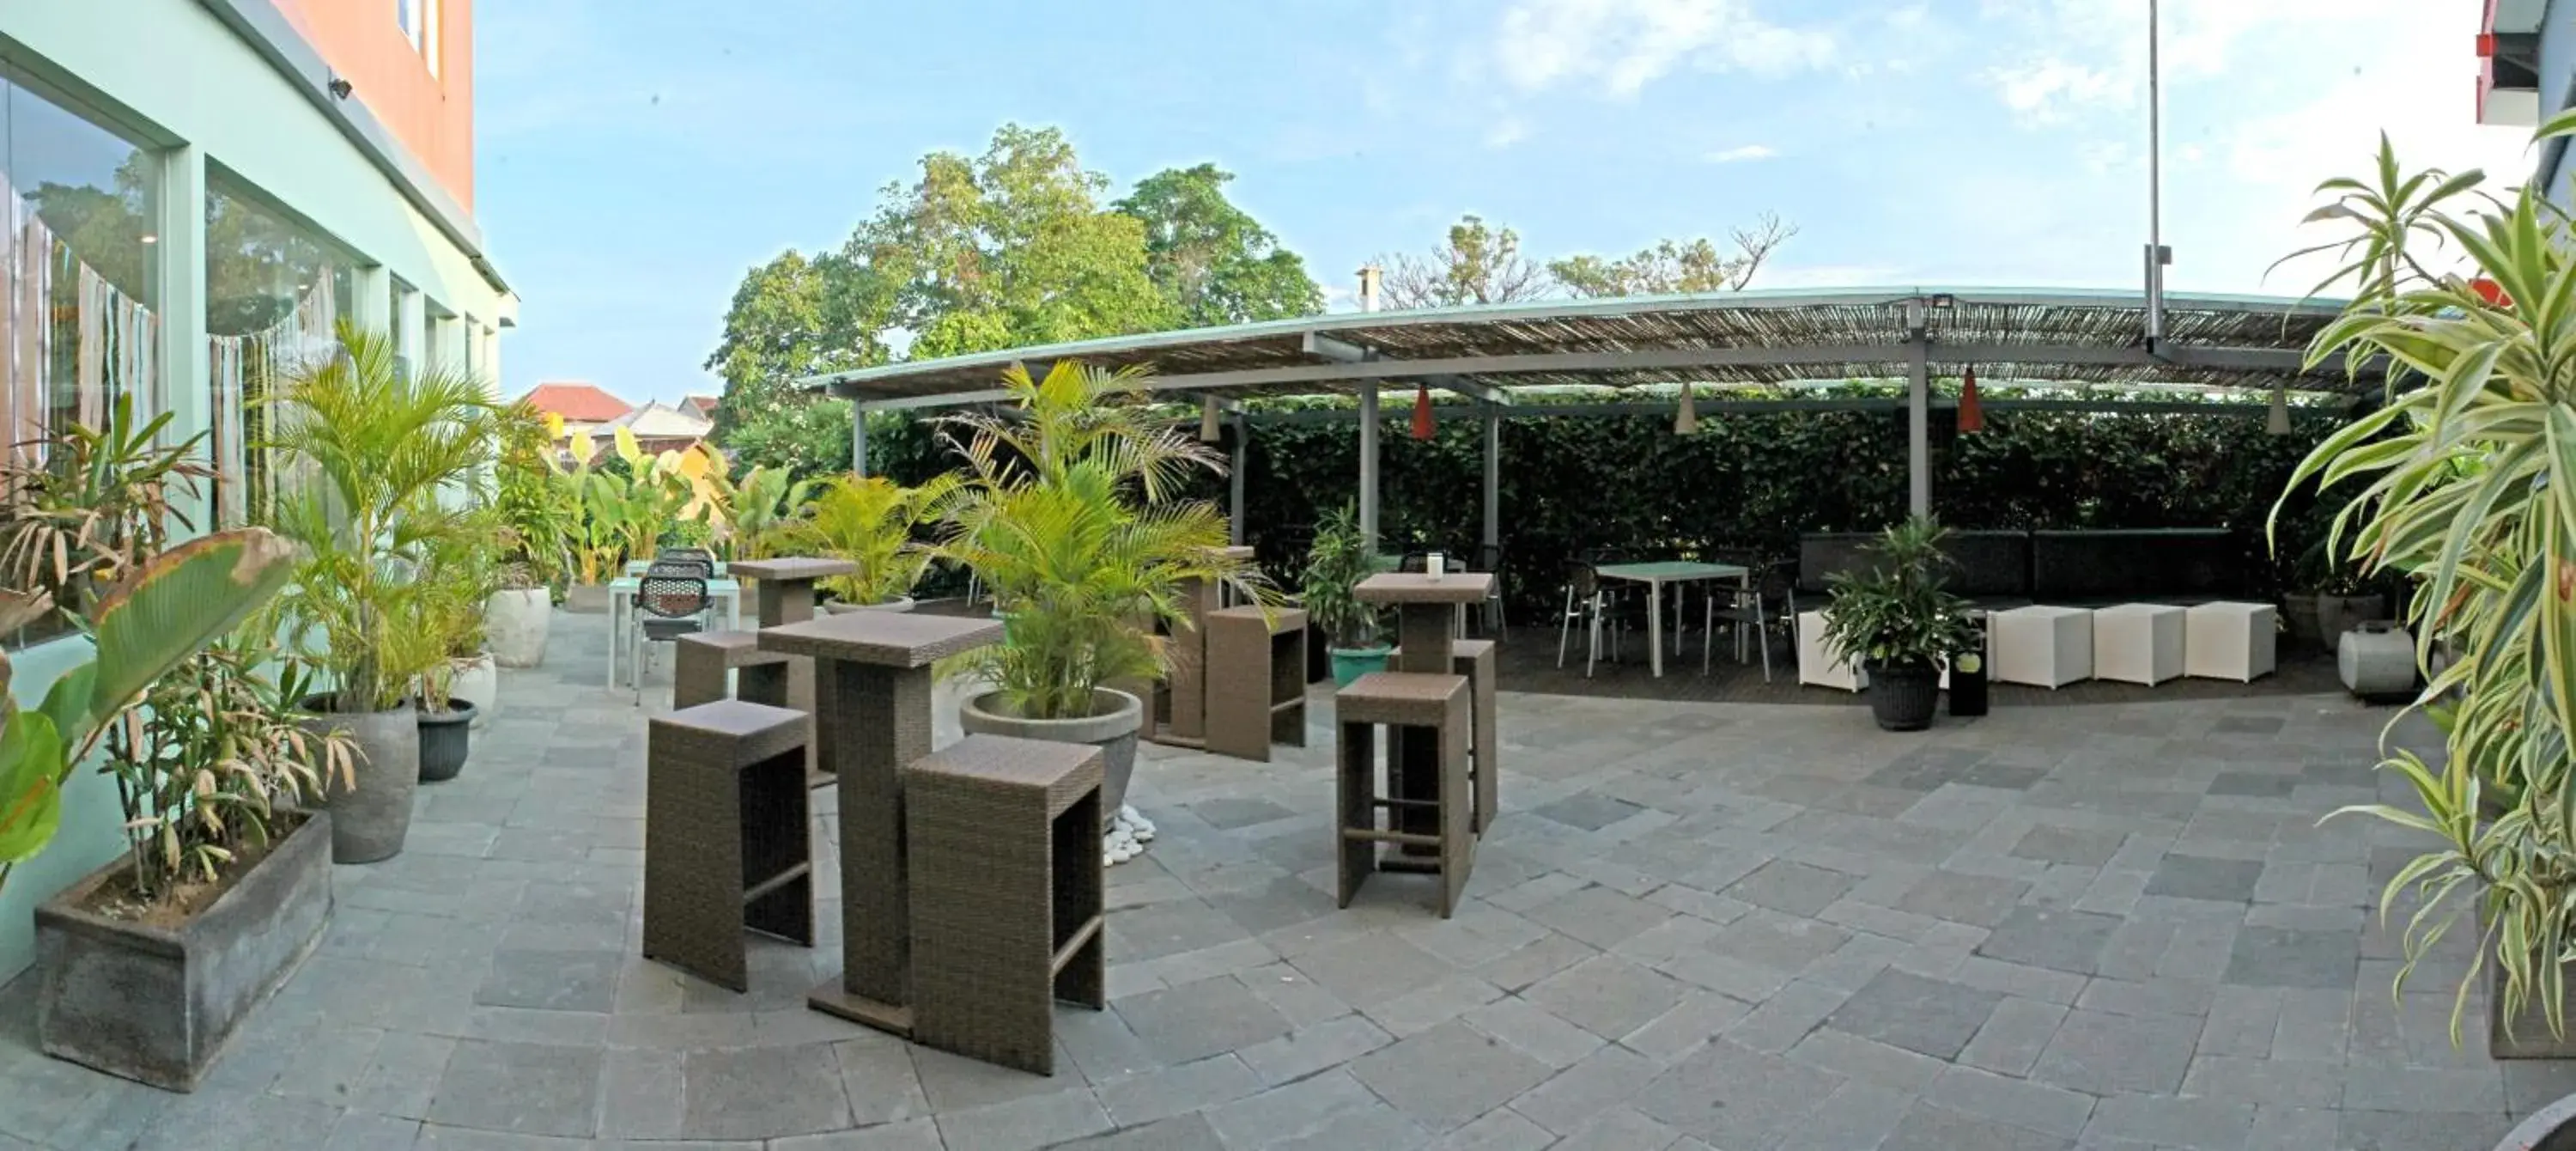 Seating area in HOTEL and RESIDENCES Riverview Kuta - Bali (Associated HARRIS)